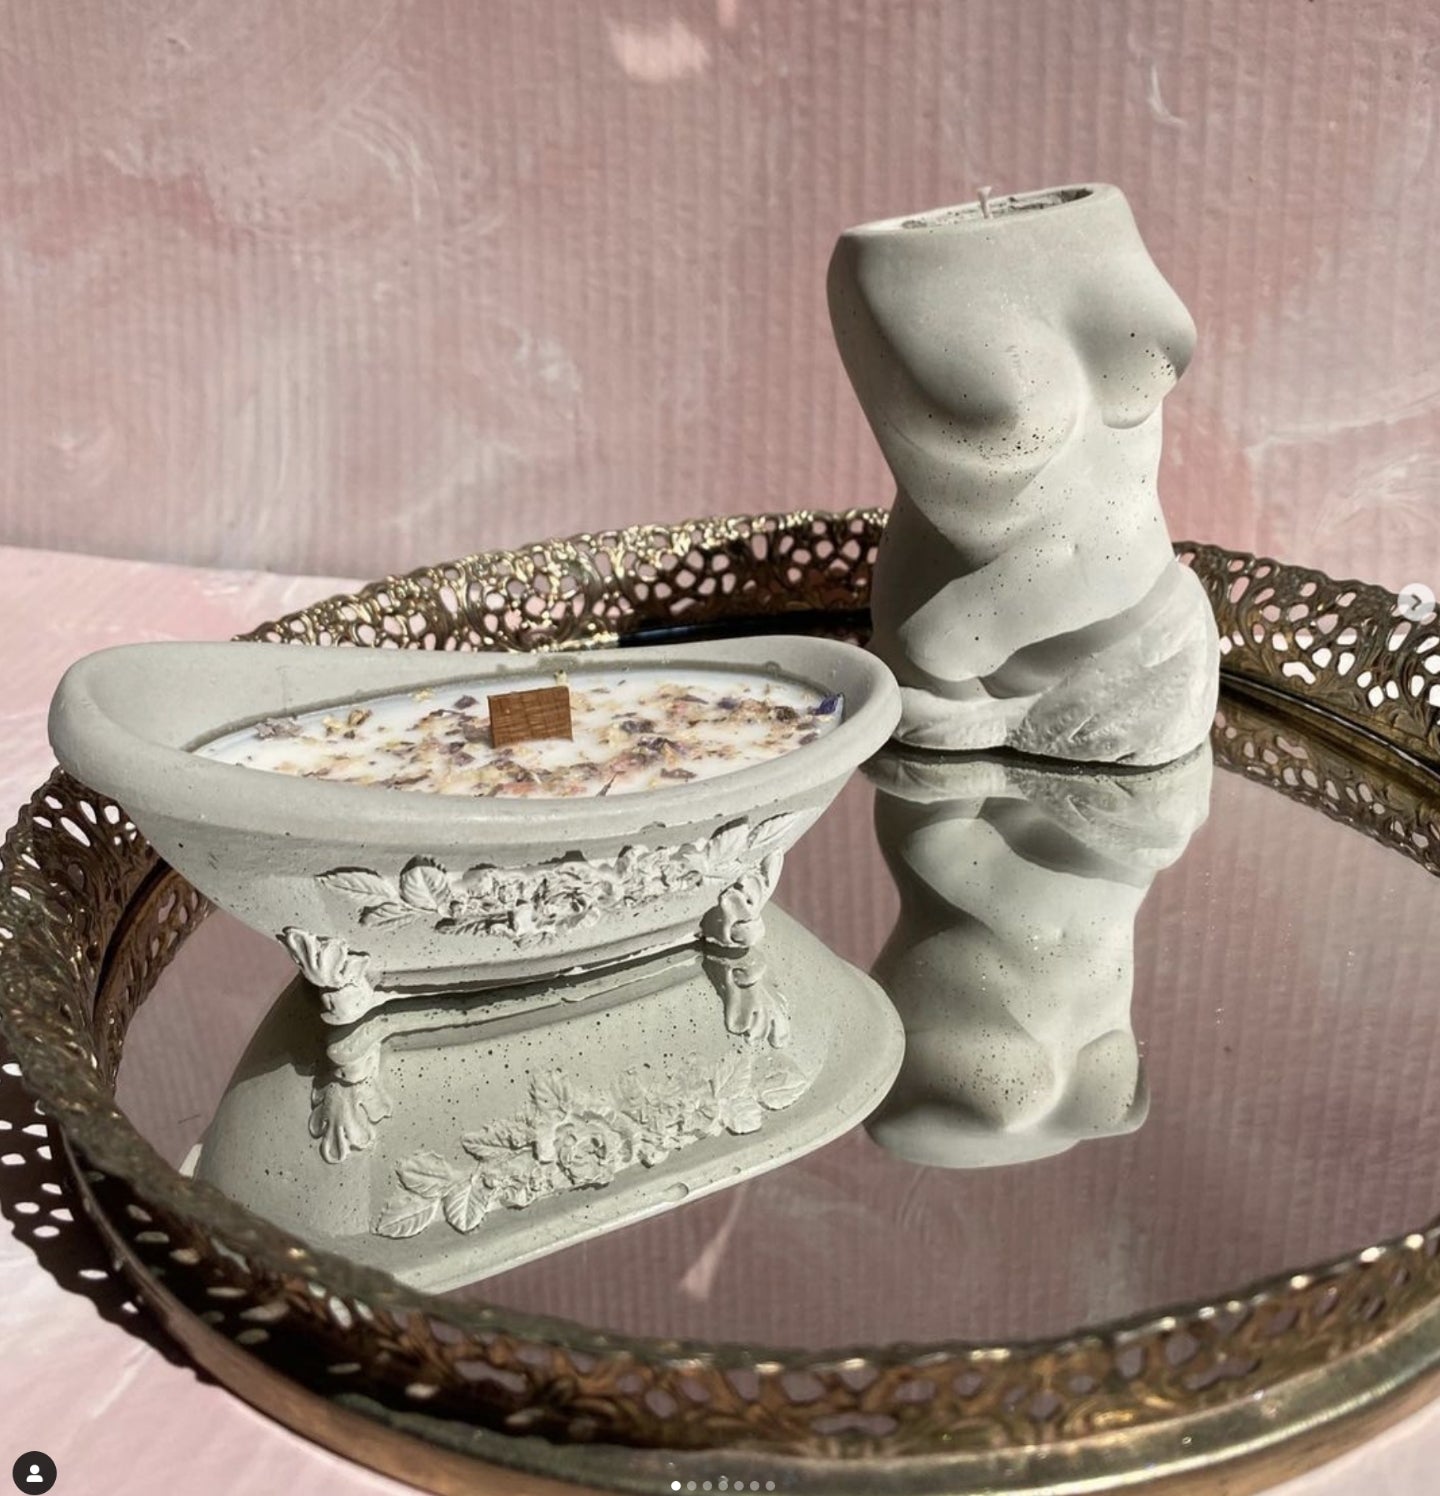 Sculptural candles, one of a luxurious clawfoot tub, one of a naked woman, on a mirrored tray, created by candlecore